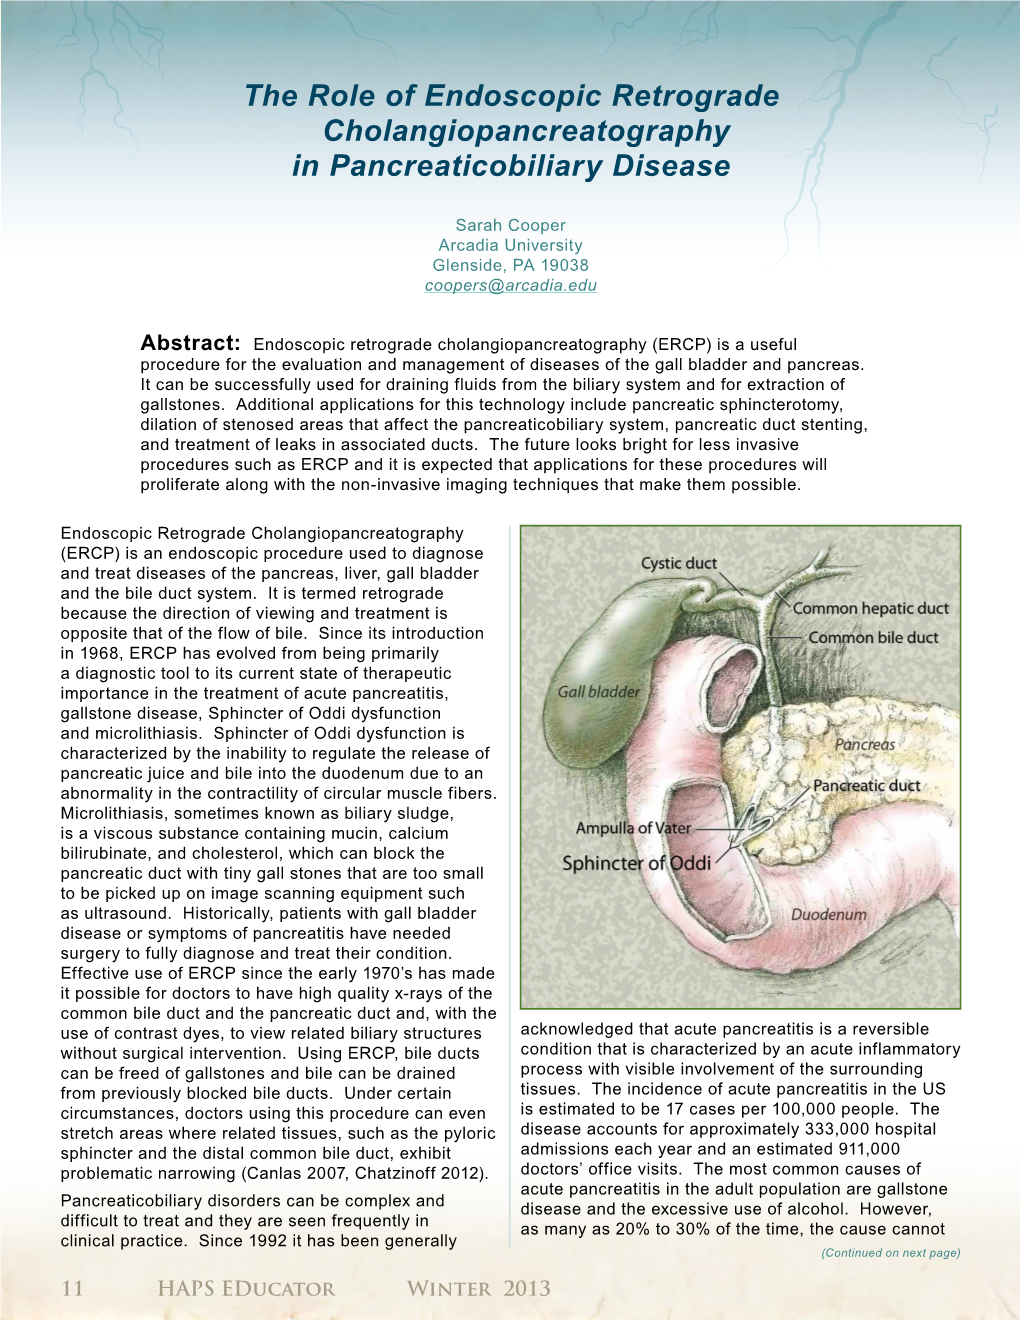 The Role of Endoscopic Retrograde Cholangiopancreatography in Pancreaticobiliary Disease